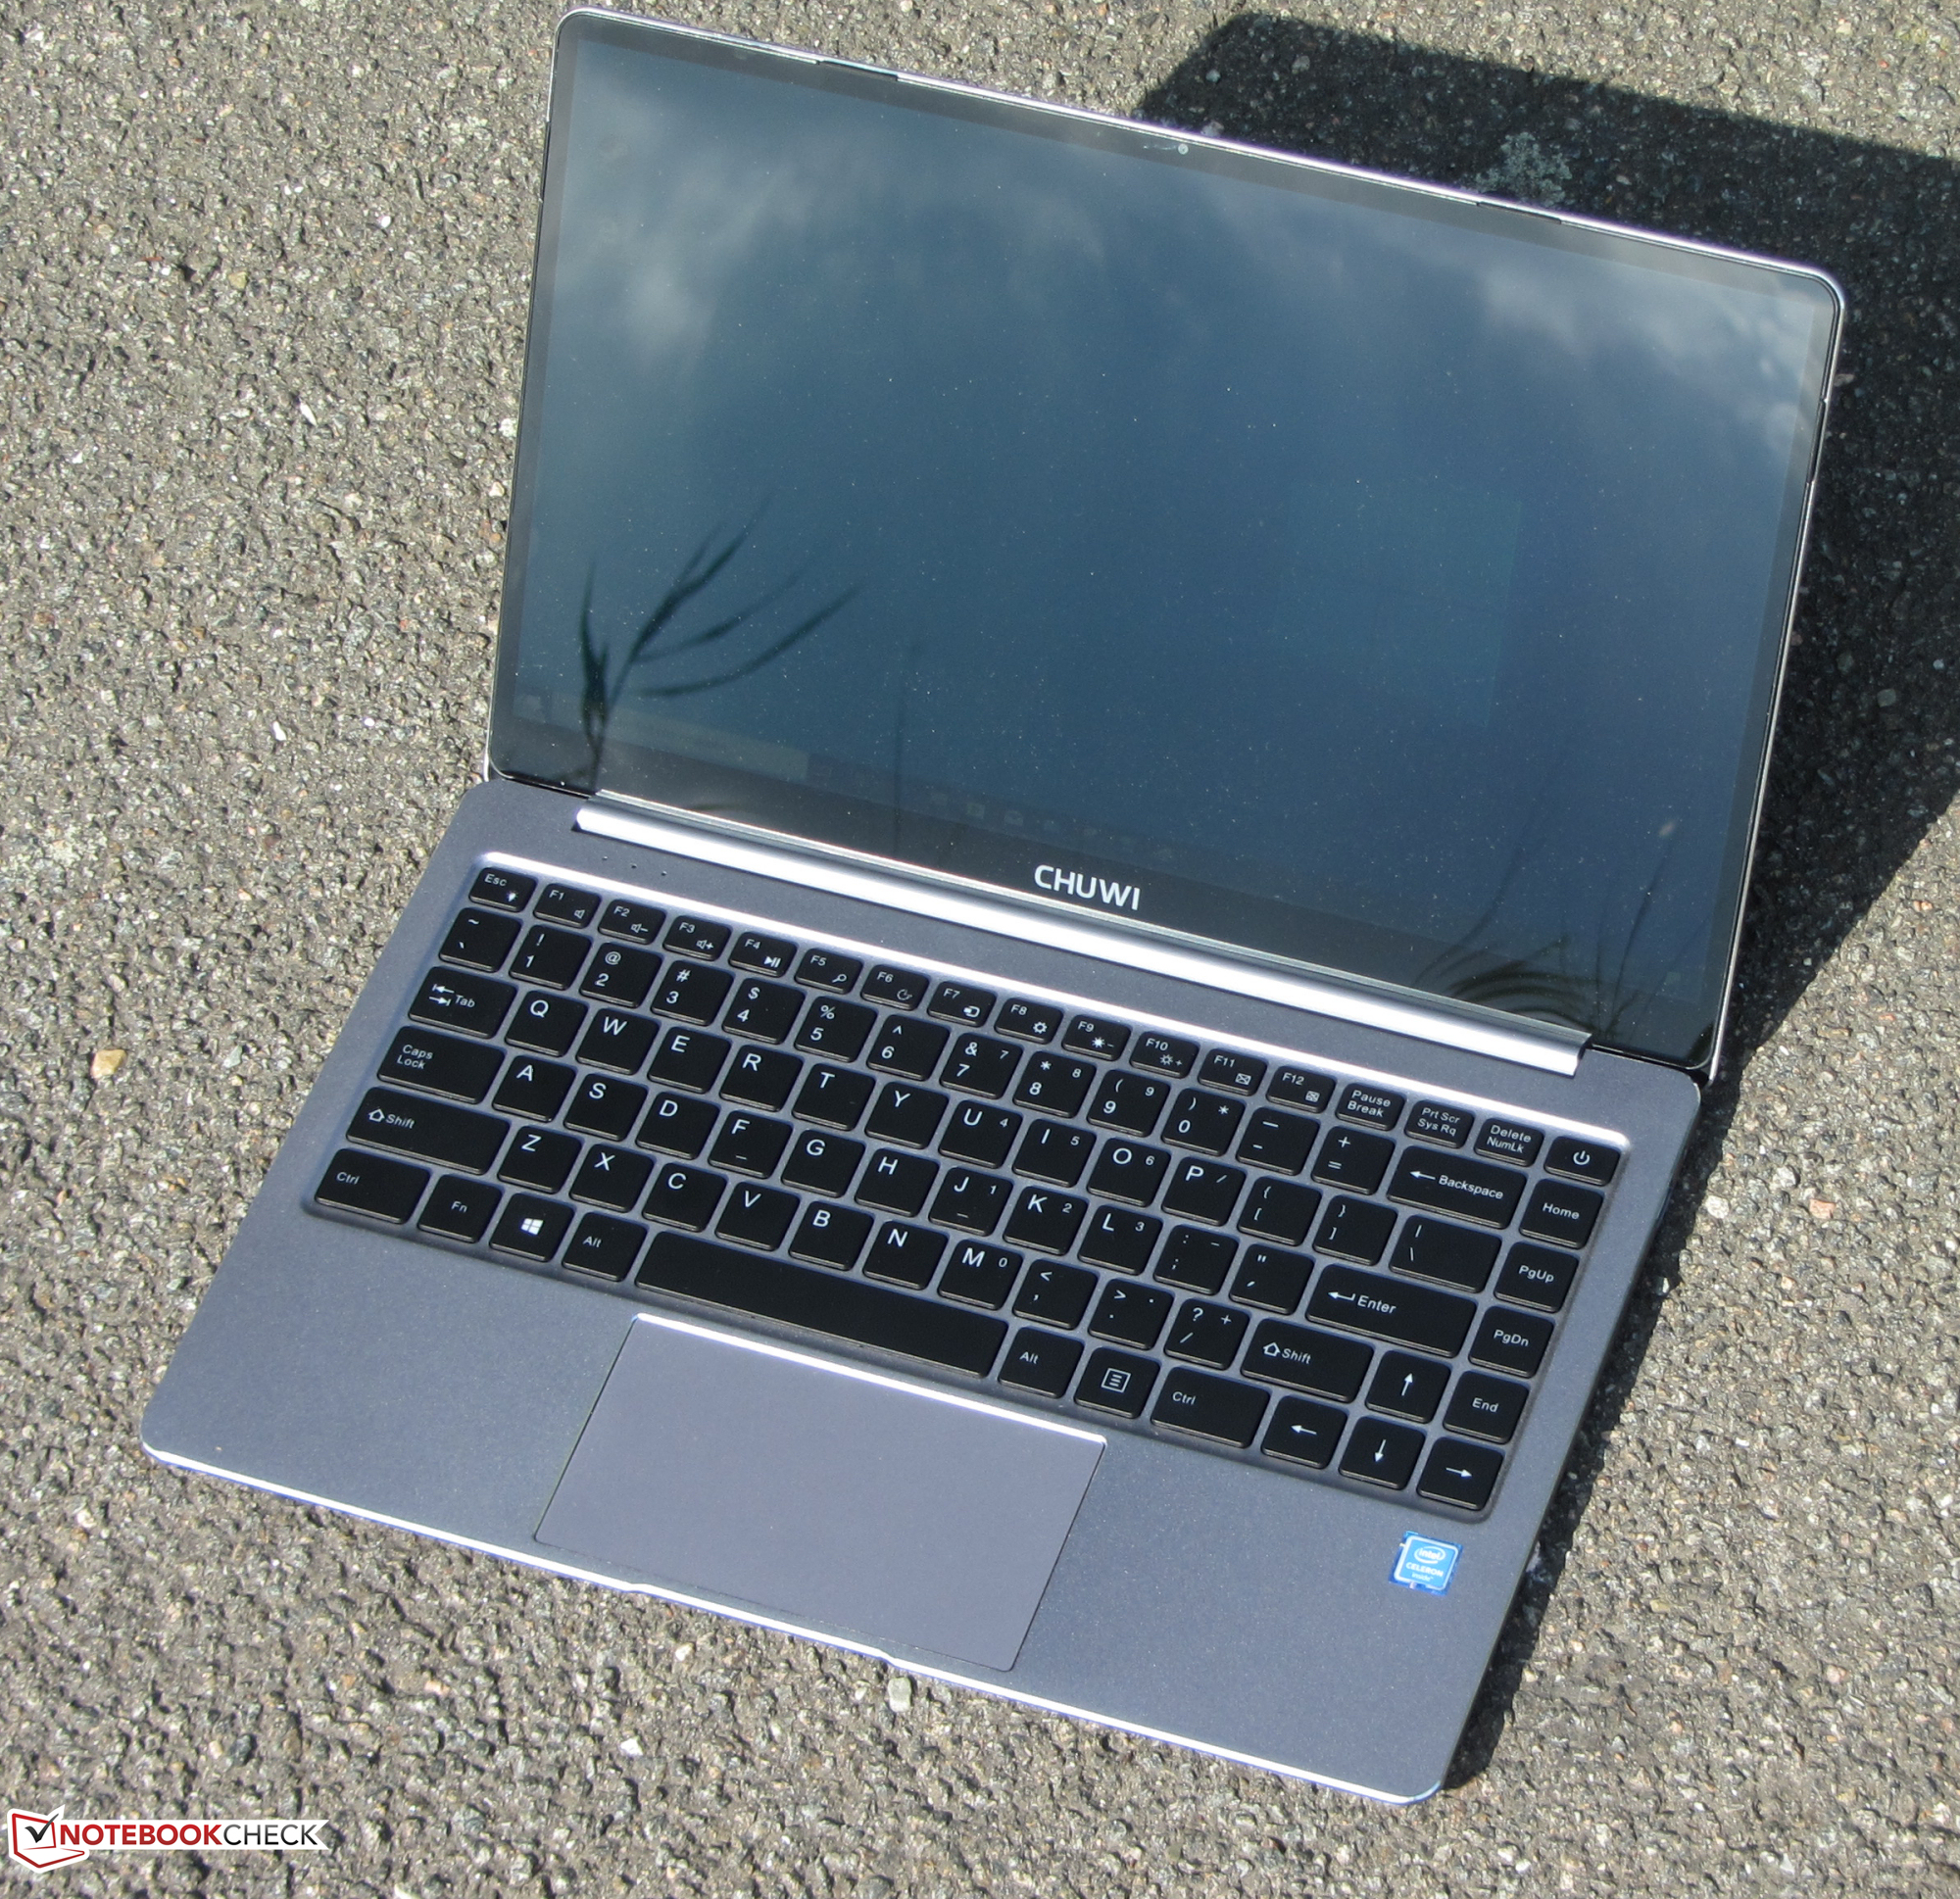 Chuwi LapBook Pro Laptop Review: An affordable 14-inch laptop with ...